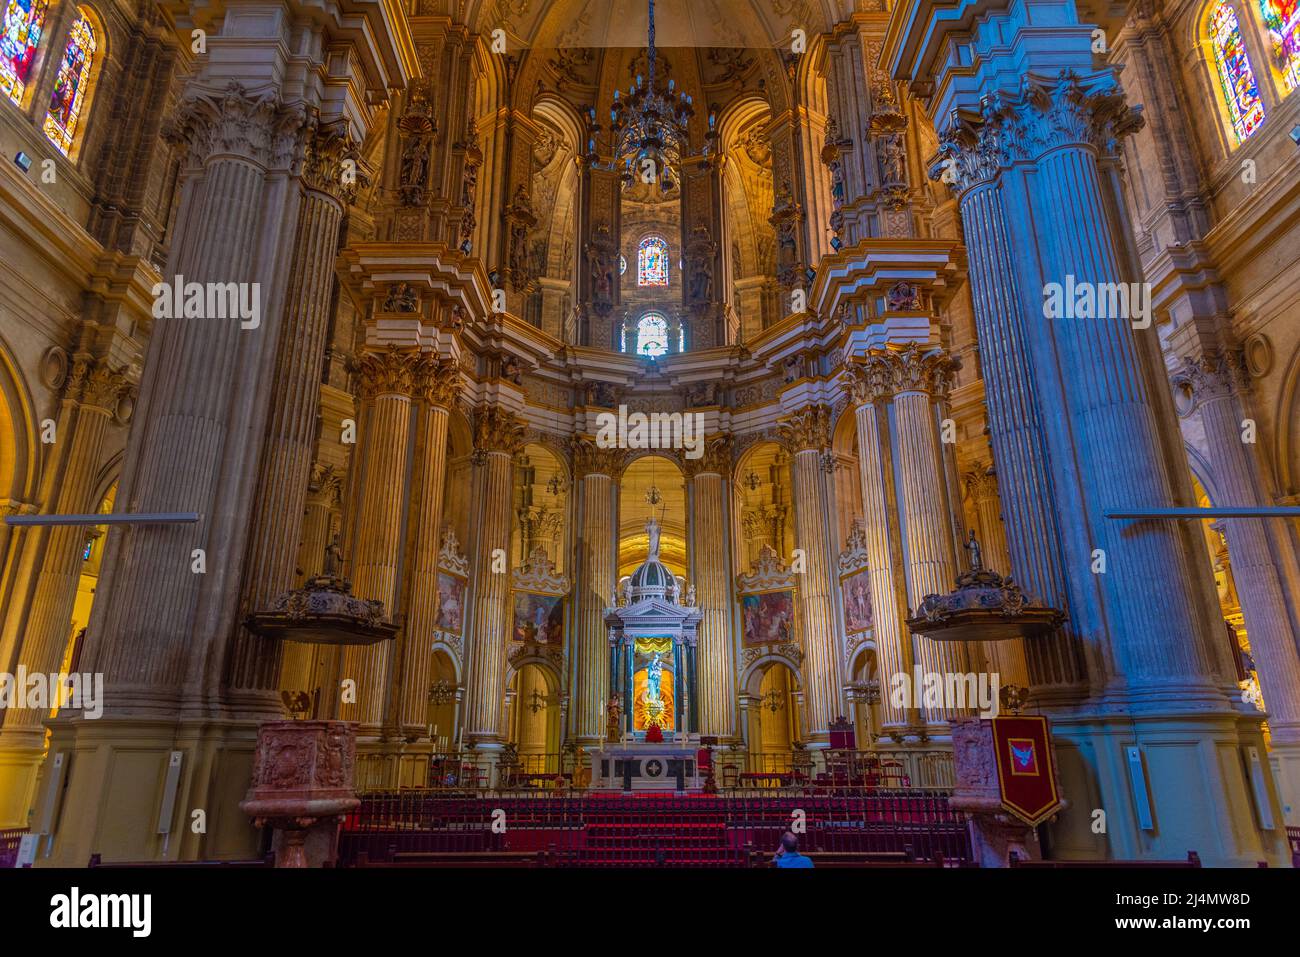 Malaga, Spain, May 24, 2021: Interior of the cathedral in Spanish town Malaga Stock Photo